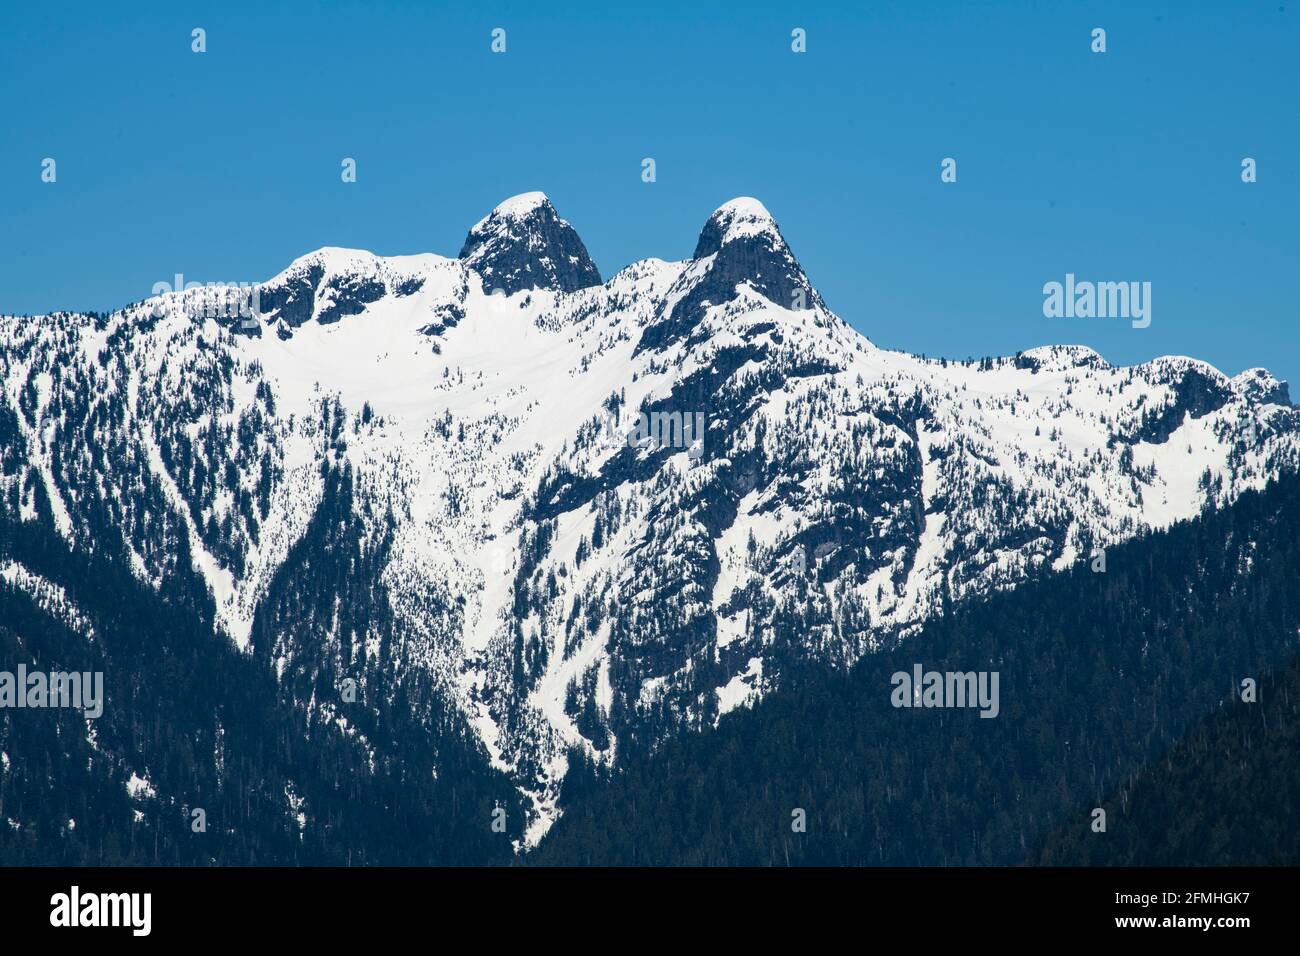 Vancouver's iconic twin peaks -The Lions, viewed from Capilano Regional Park in North Vancouver. Stock Photo